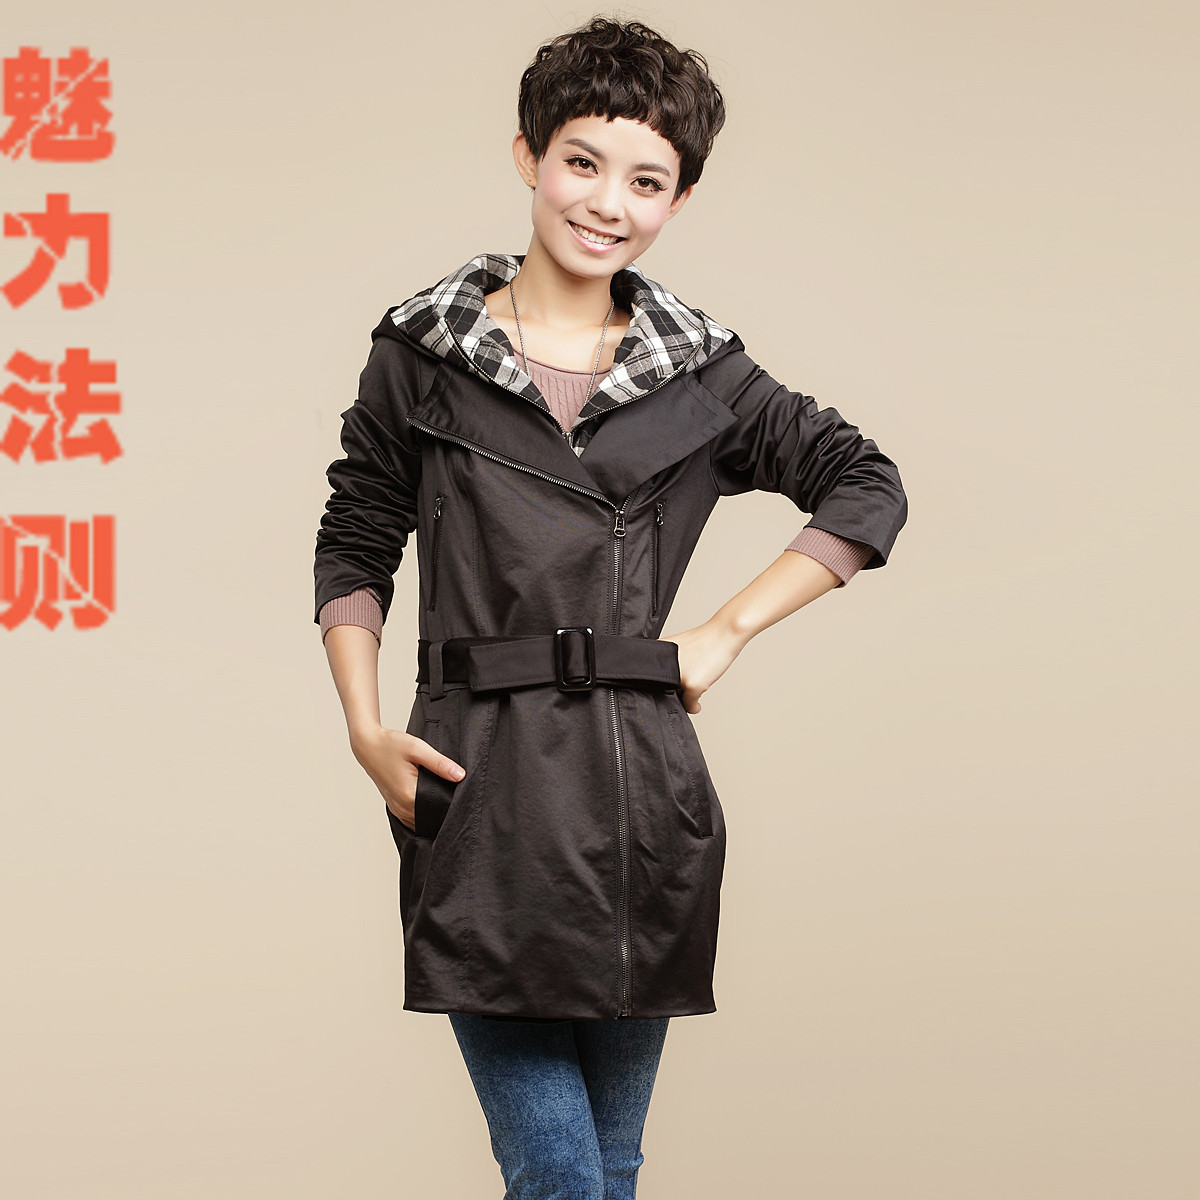 Overcoat outerwear autumn new arrival high quality women's 2012 medium-long outerwear thickening slim trench